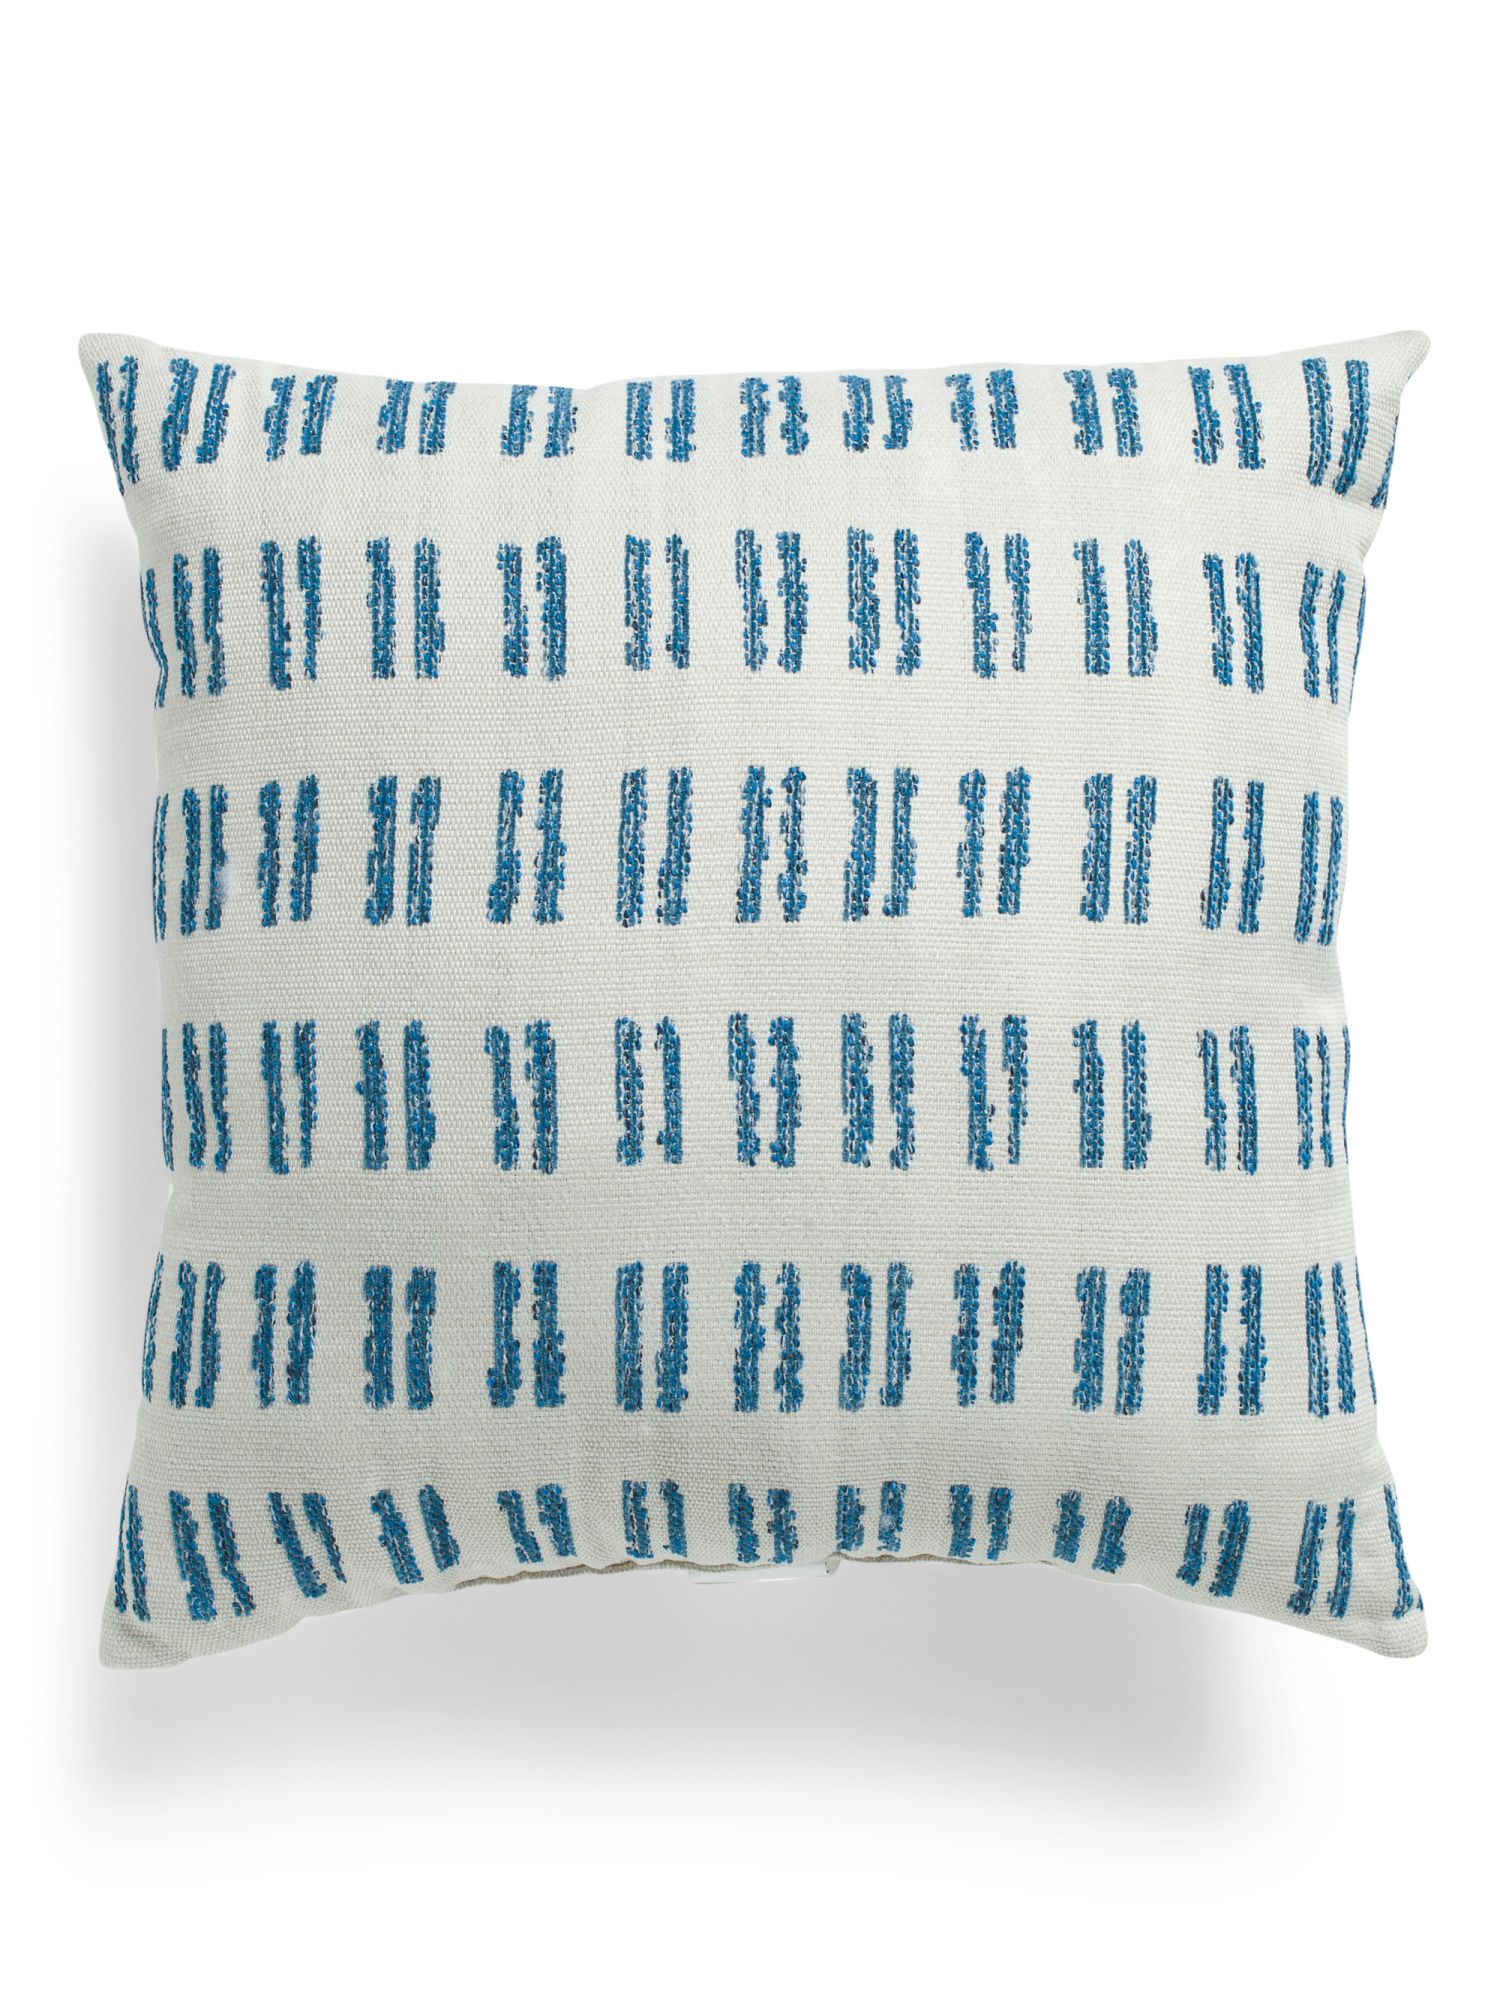 Made In Usa 22x22 Indoor Outdoor Textured Pillow | TJ Maxx